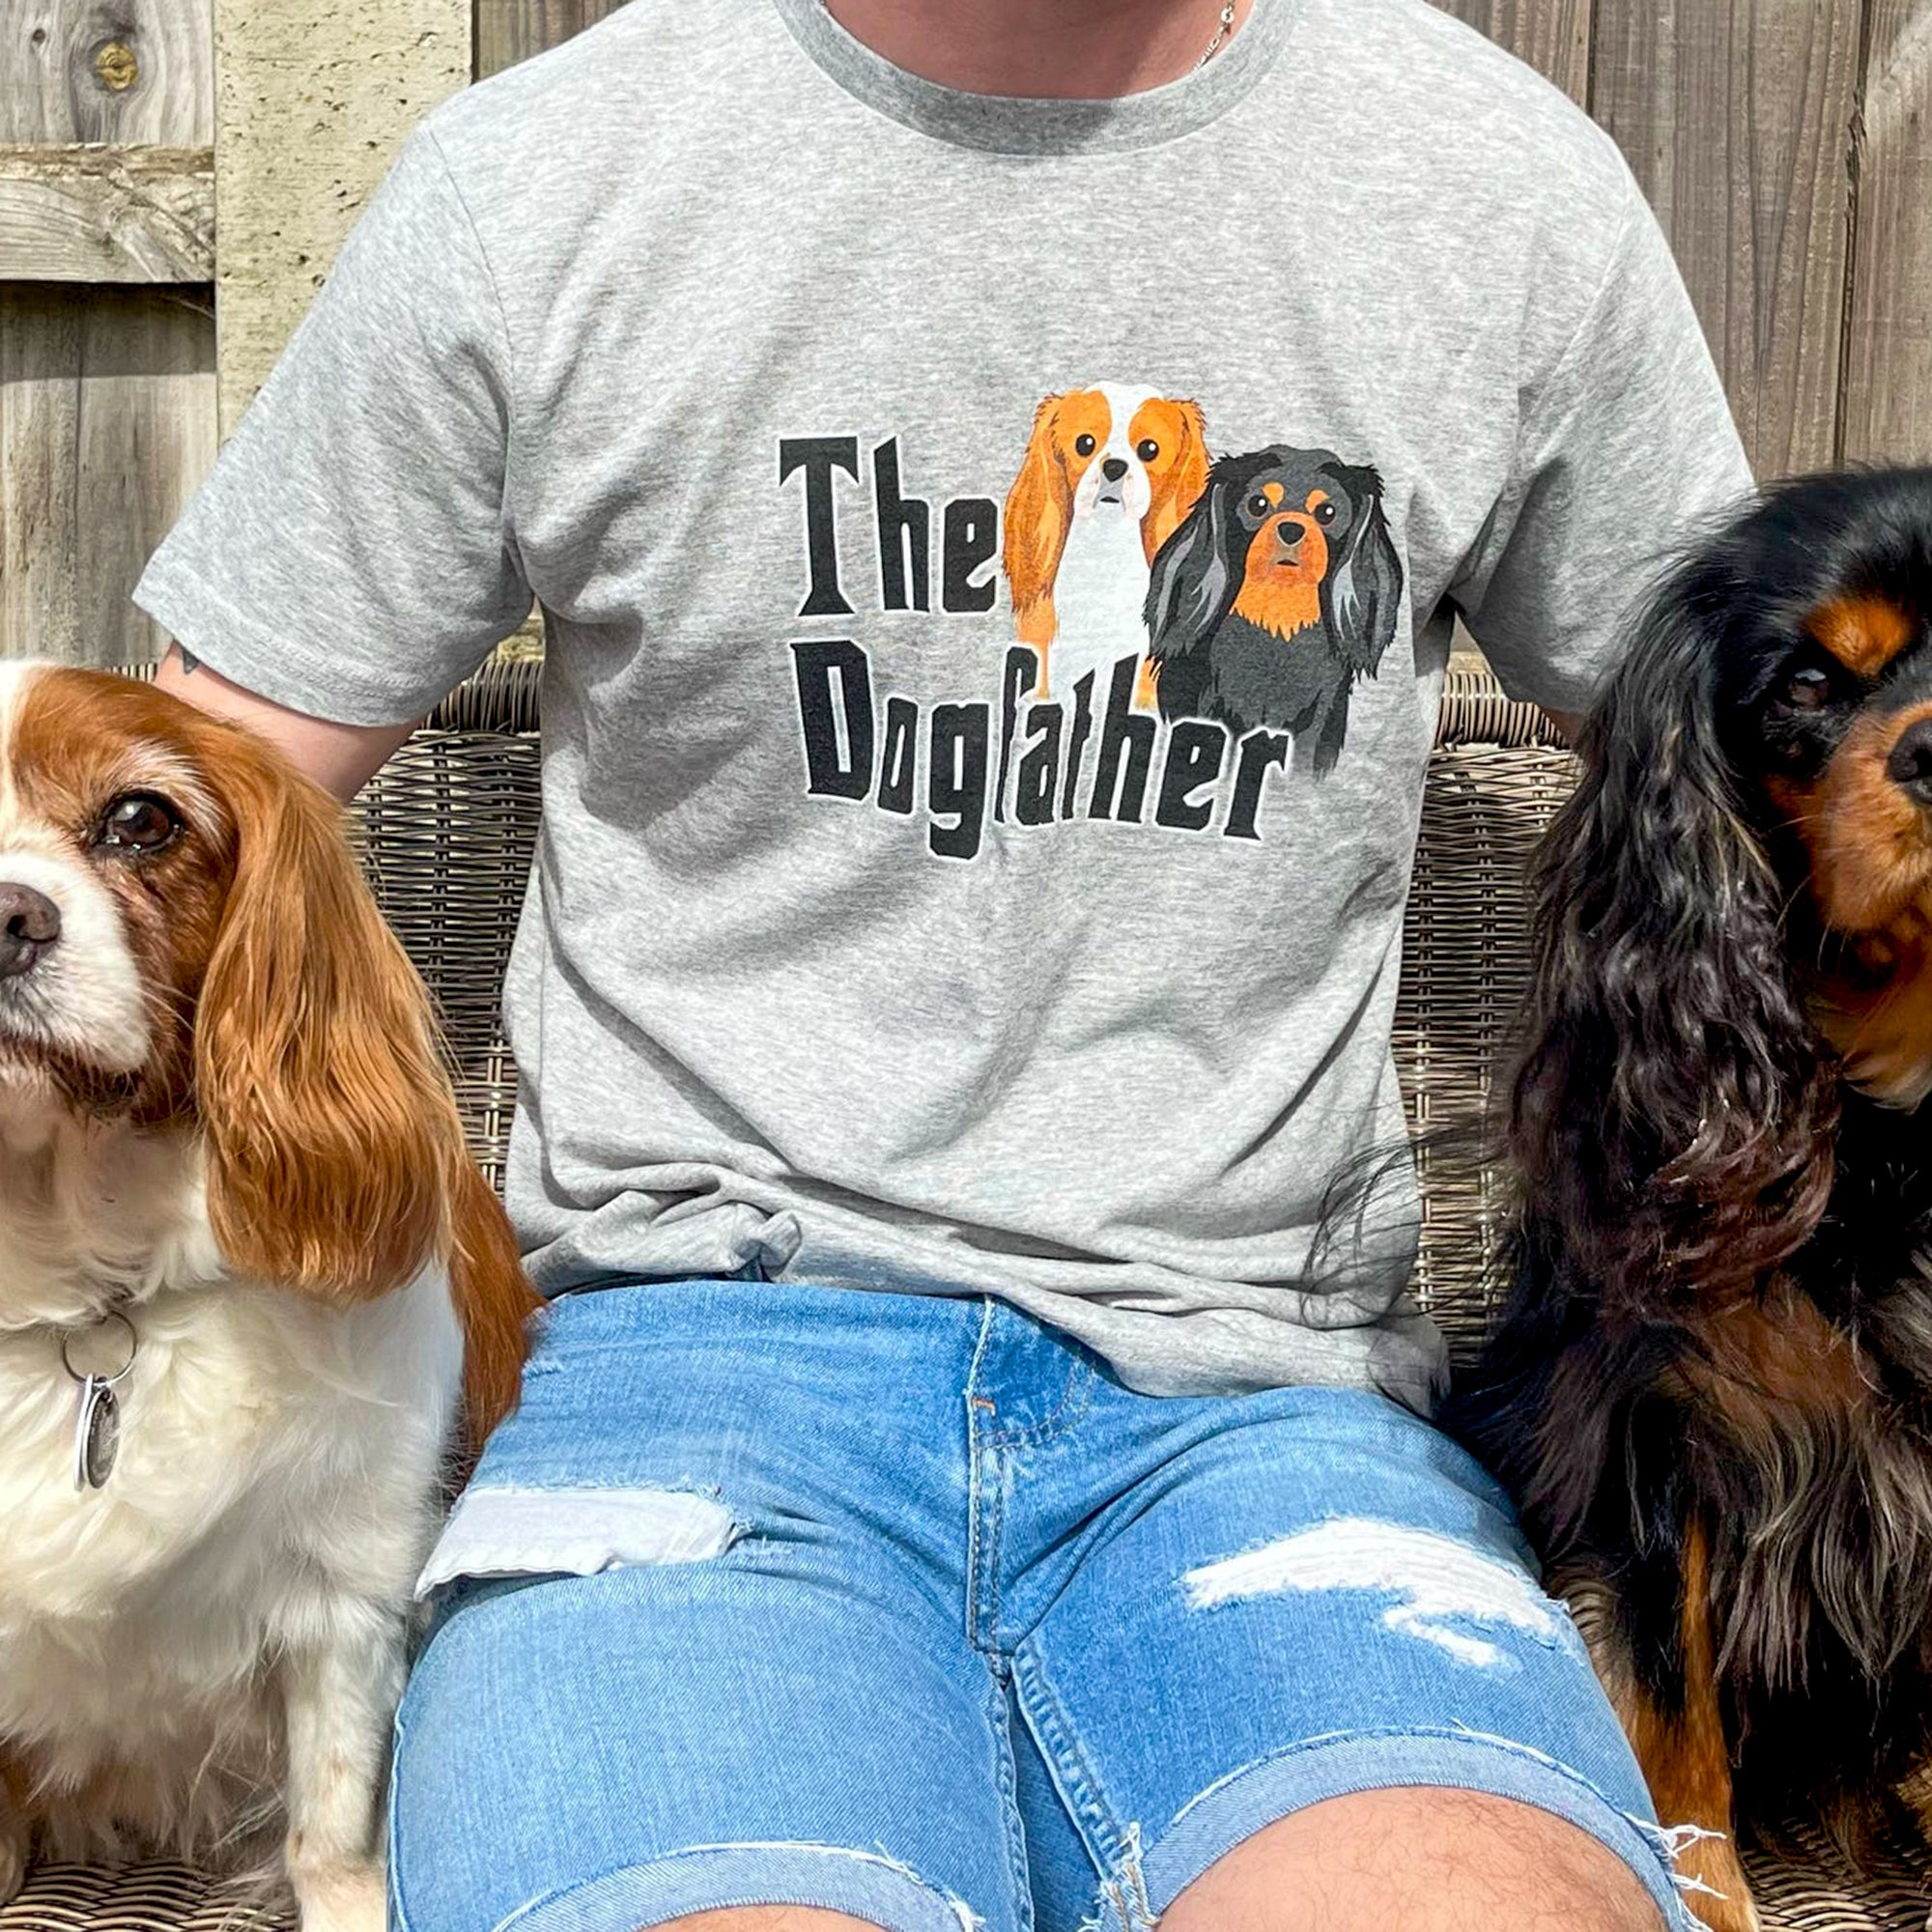 The Dogfather Illustrated T-shirt